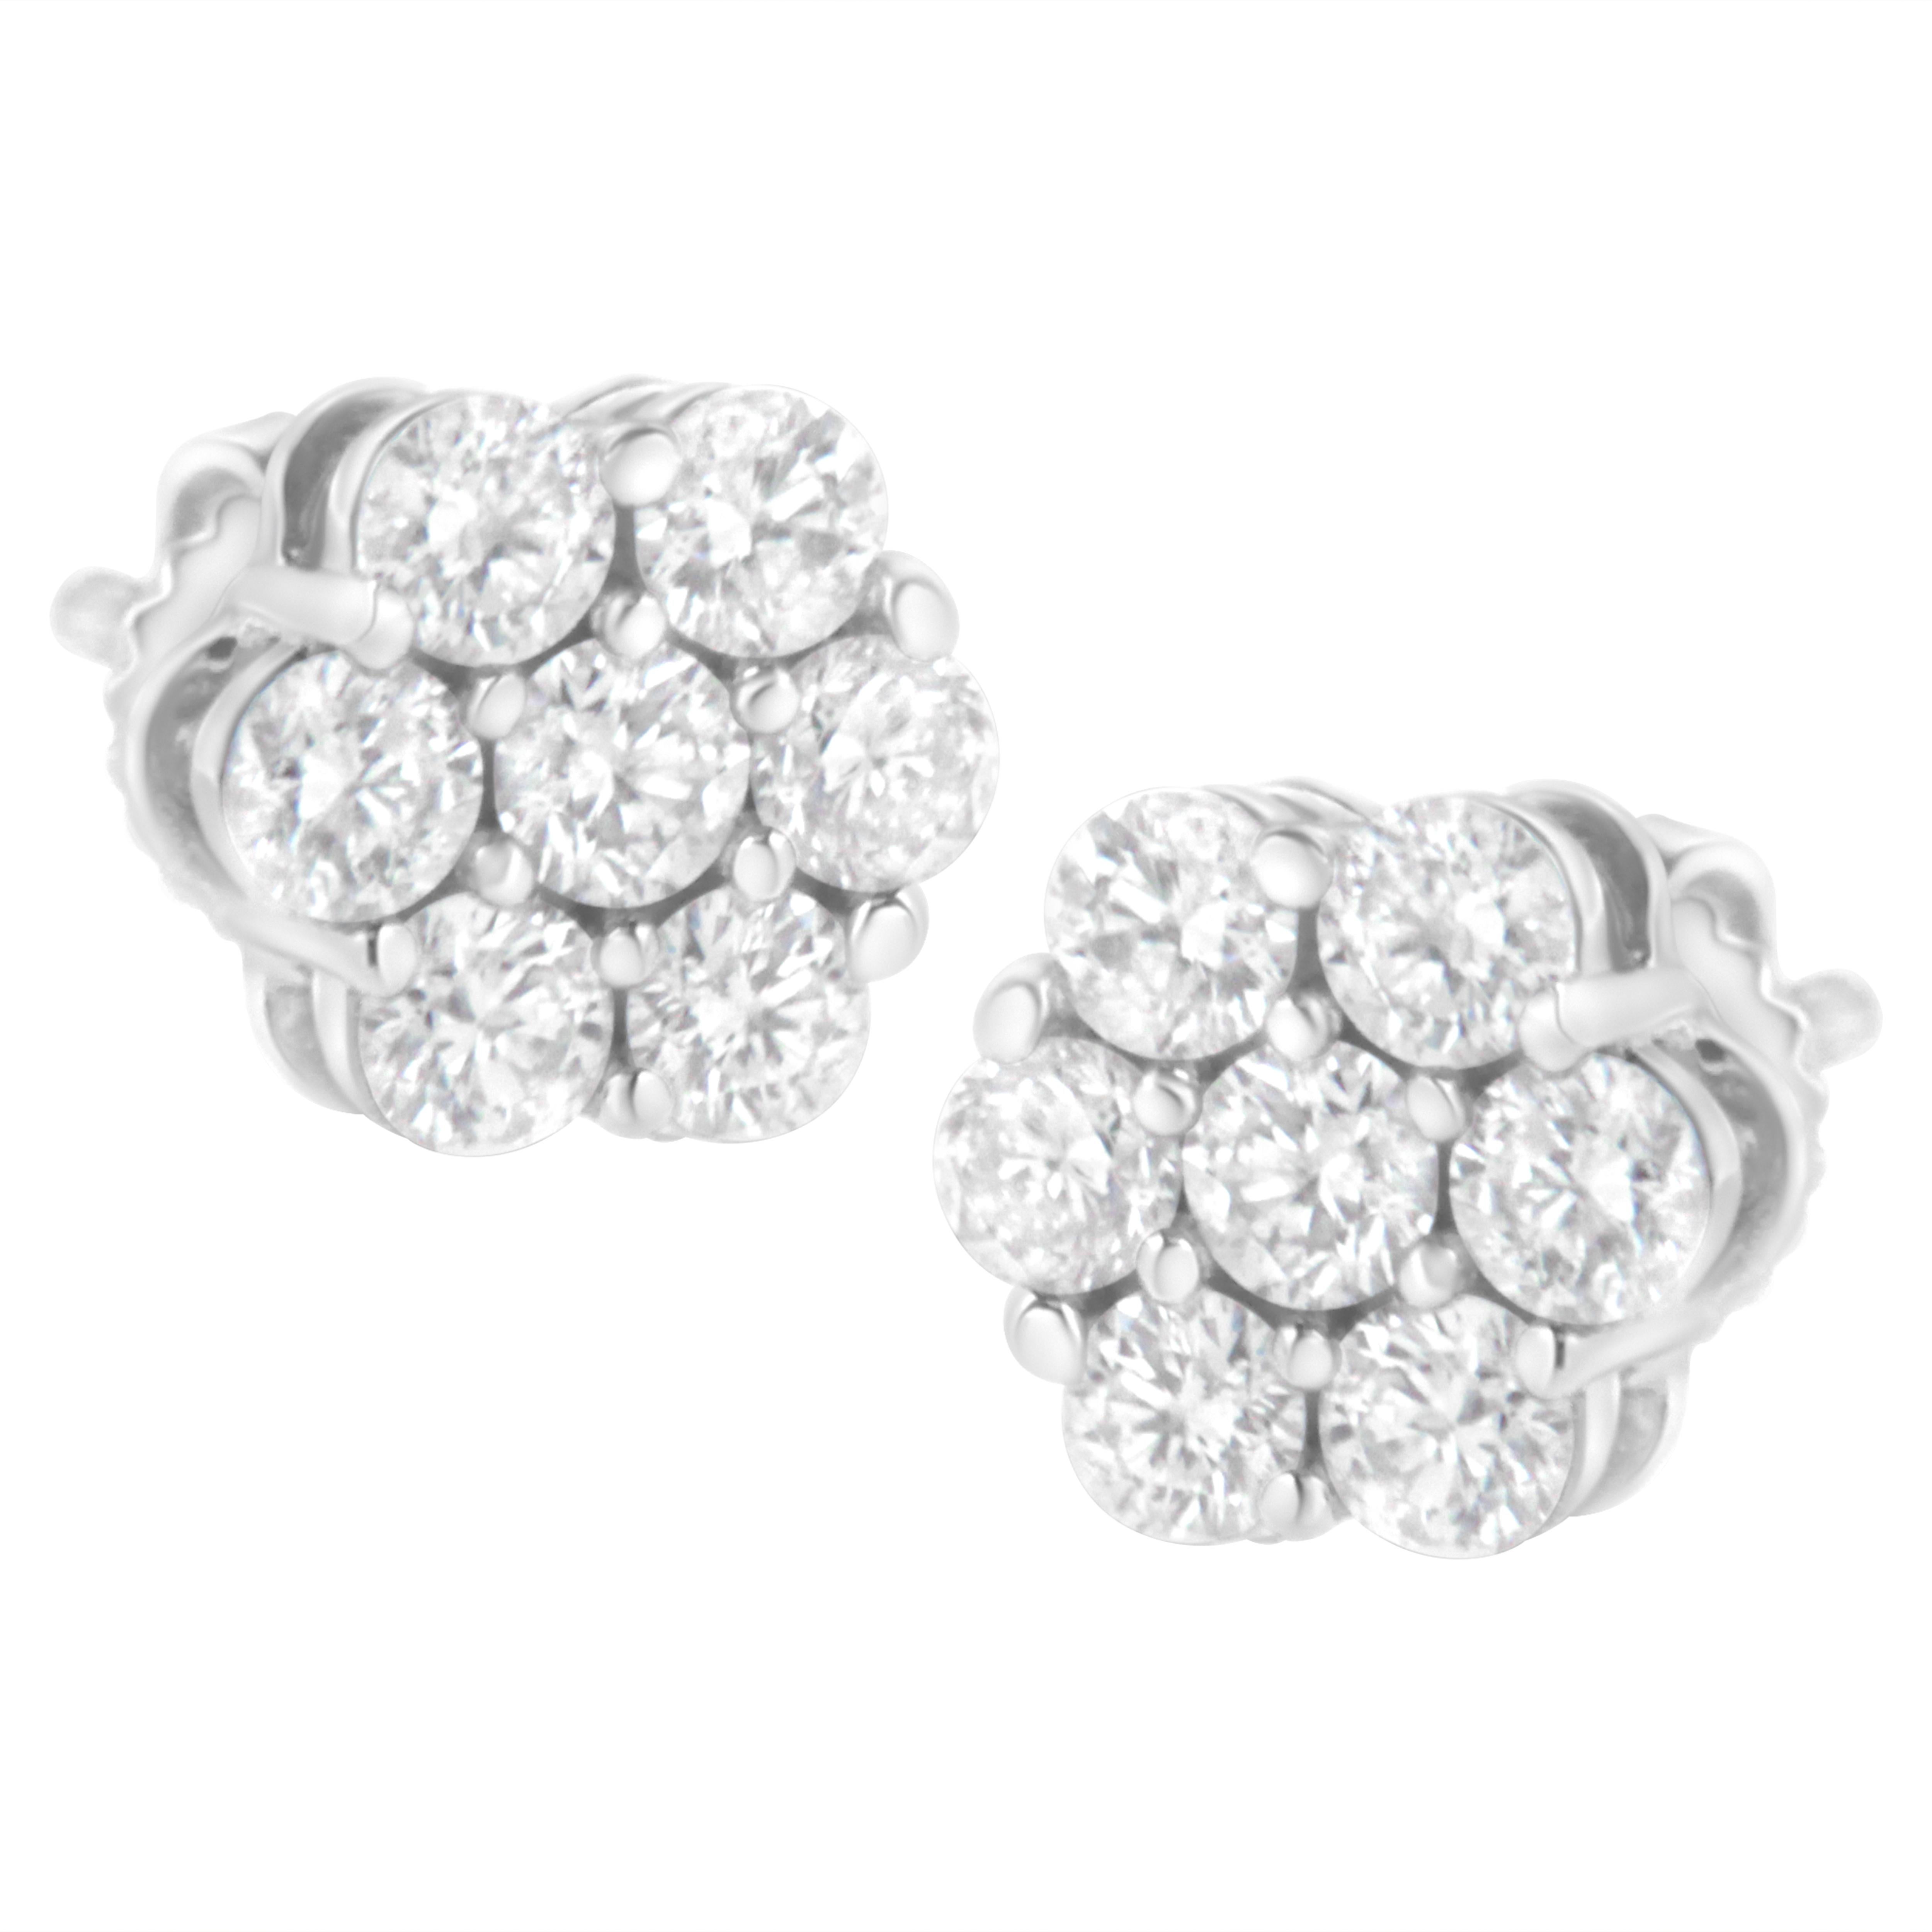 Classic and elegant, these diamond stud earrings are a must-have look any woman will adore. Created in 14K white gold, each earring features a glistening flower-shaped composite of shimmering round diamonds that catches the eye. A traditional look